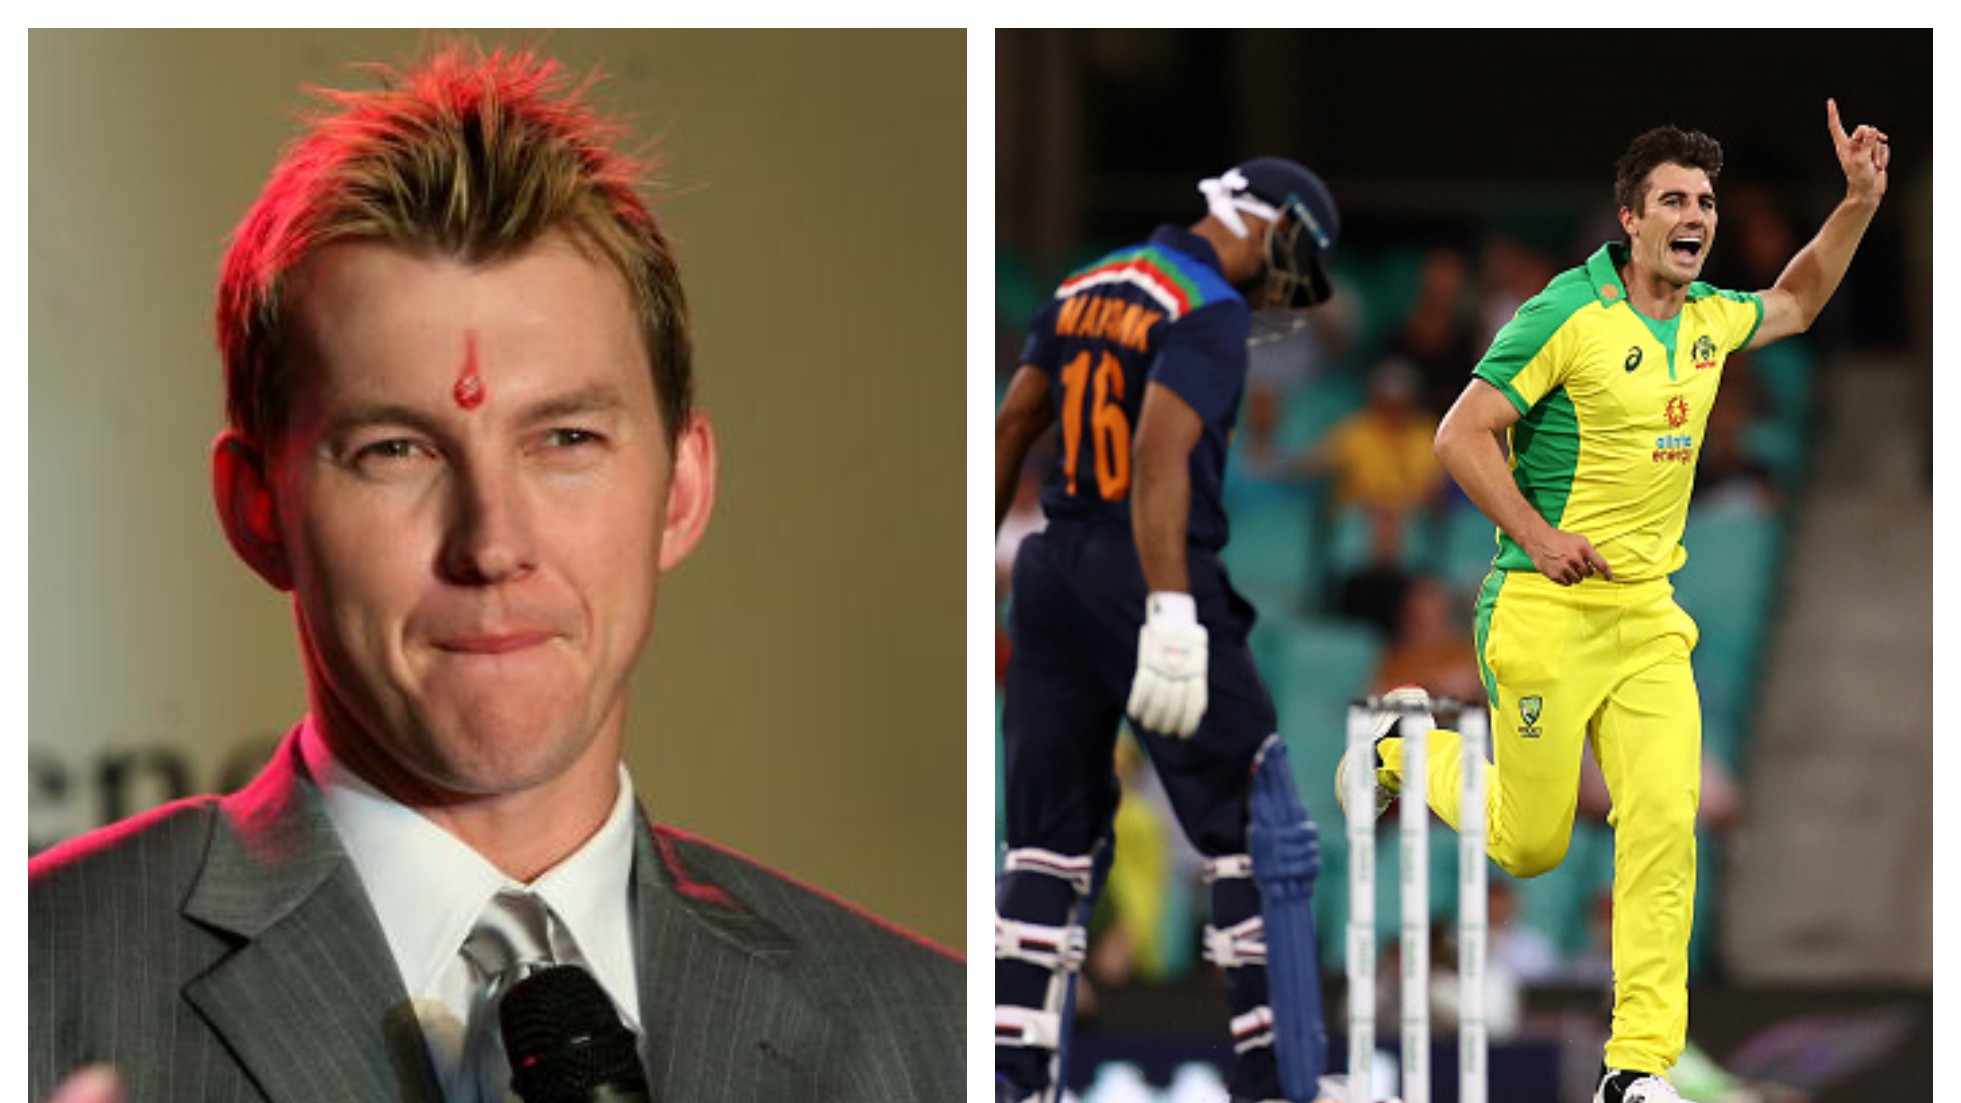 AUS v IND 2020-21: Brett Lee questions Australia's decision to rest Pat Cummins after the first two ODIs